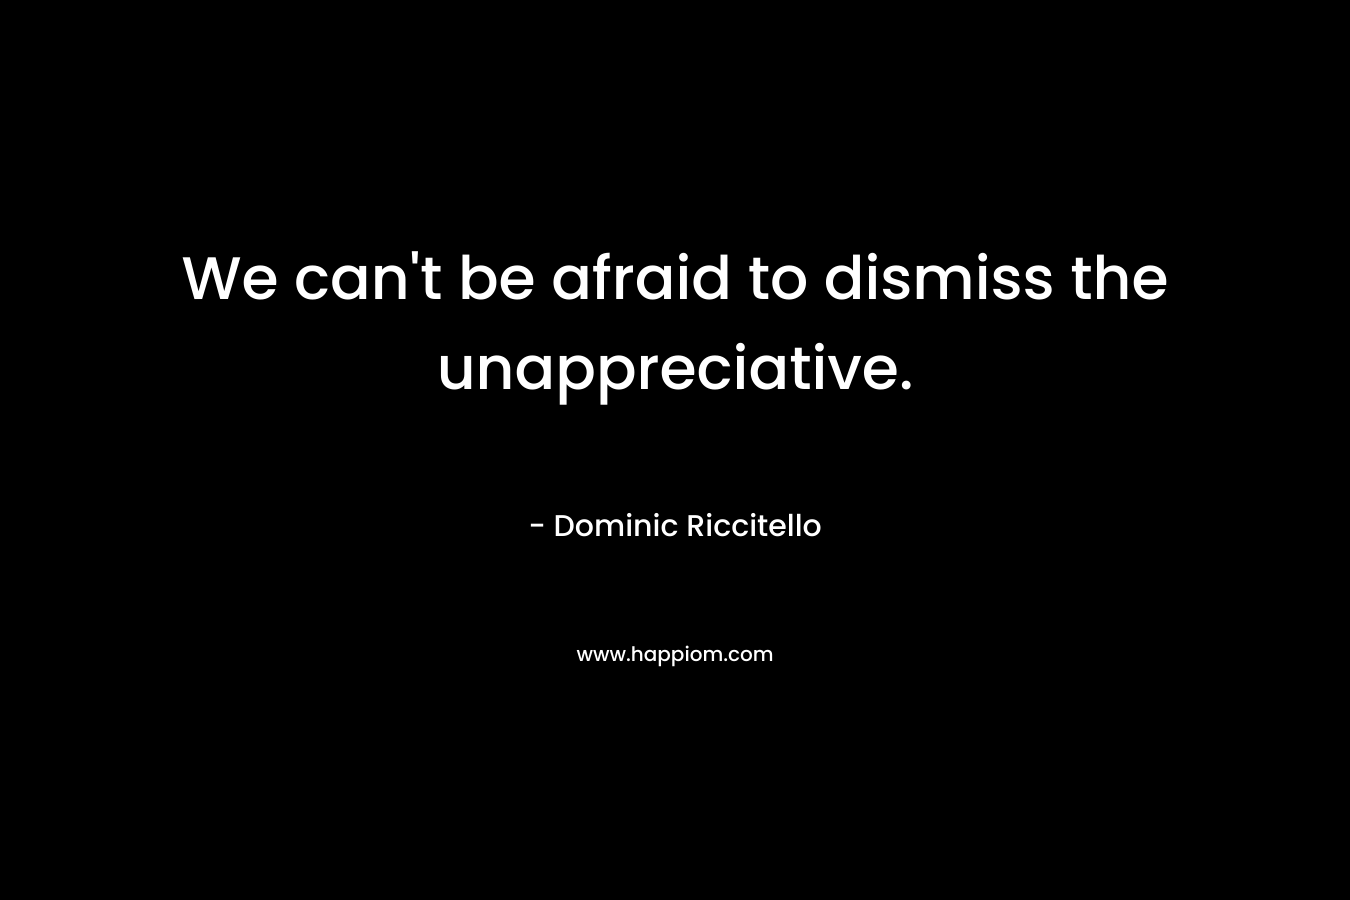 We can't be afraid to dismiss the unappreciative.